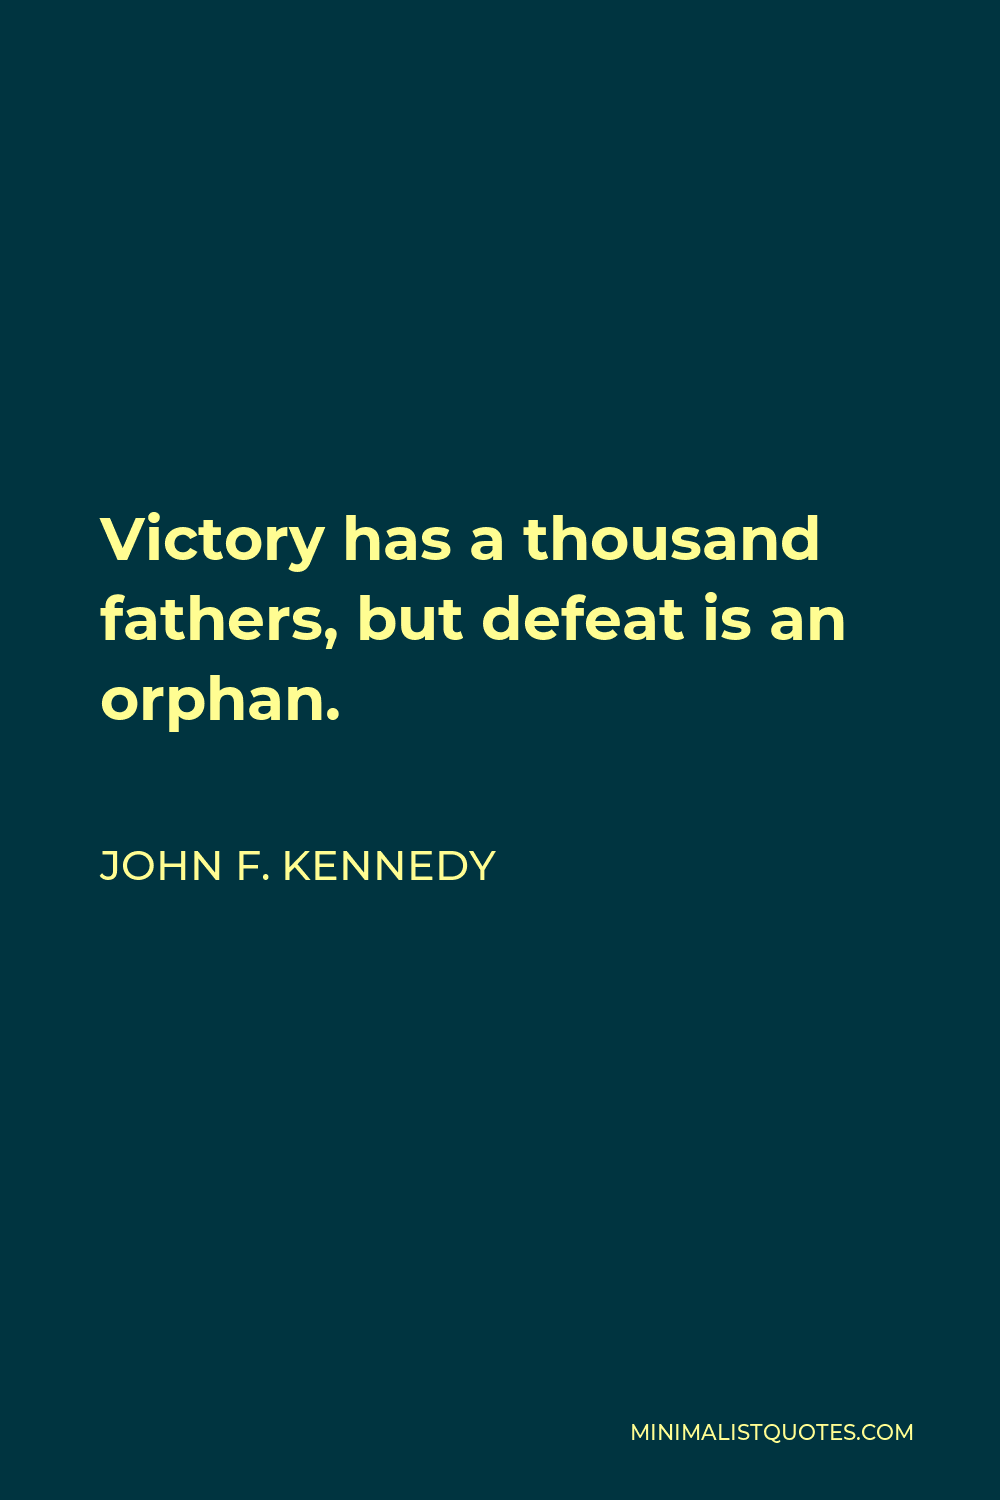 John F. Kennedy Quote - Victory has a thousand fathers, but defeat is an orphan.